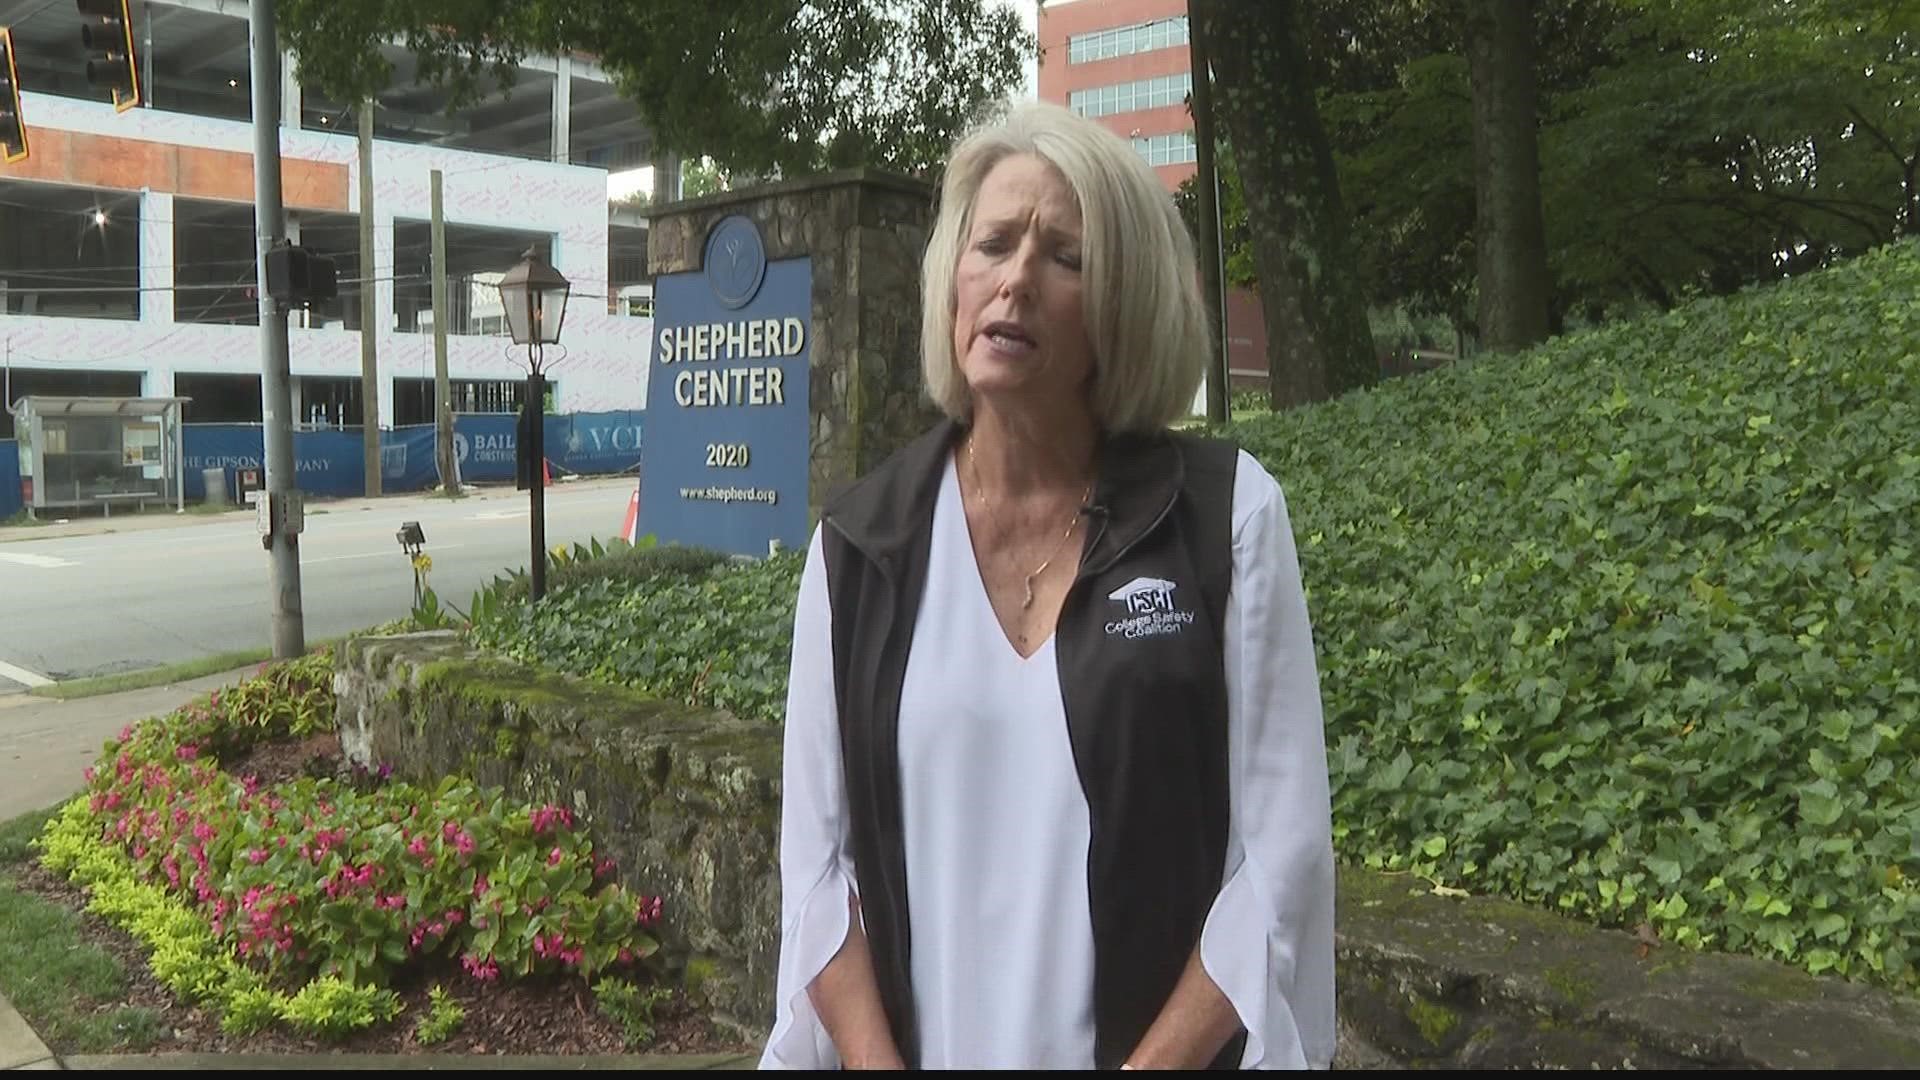 After her son suffered a near-fatal accident at a local college, she is pushing for a new law that greatly promotes student safety at universities.